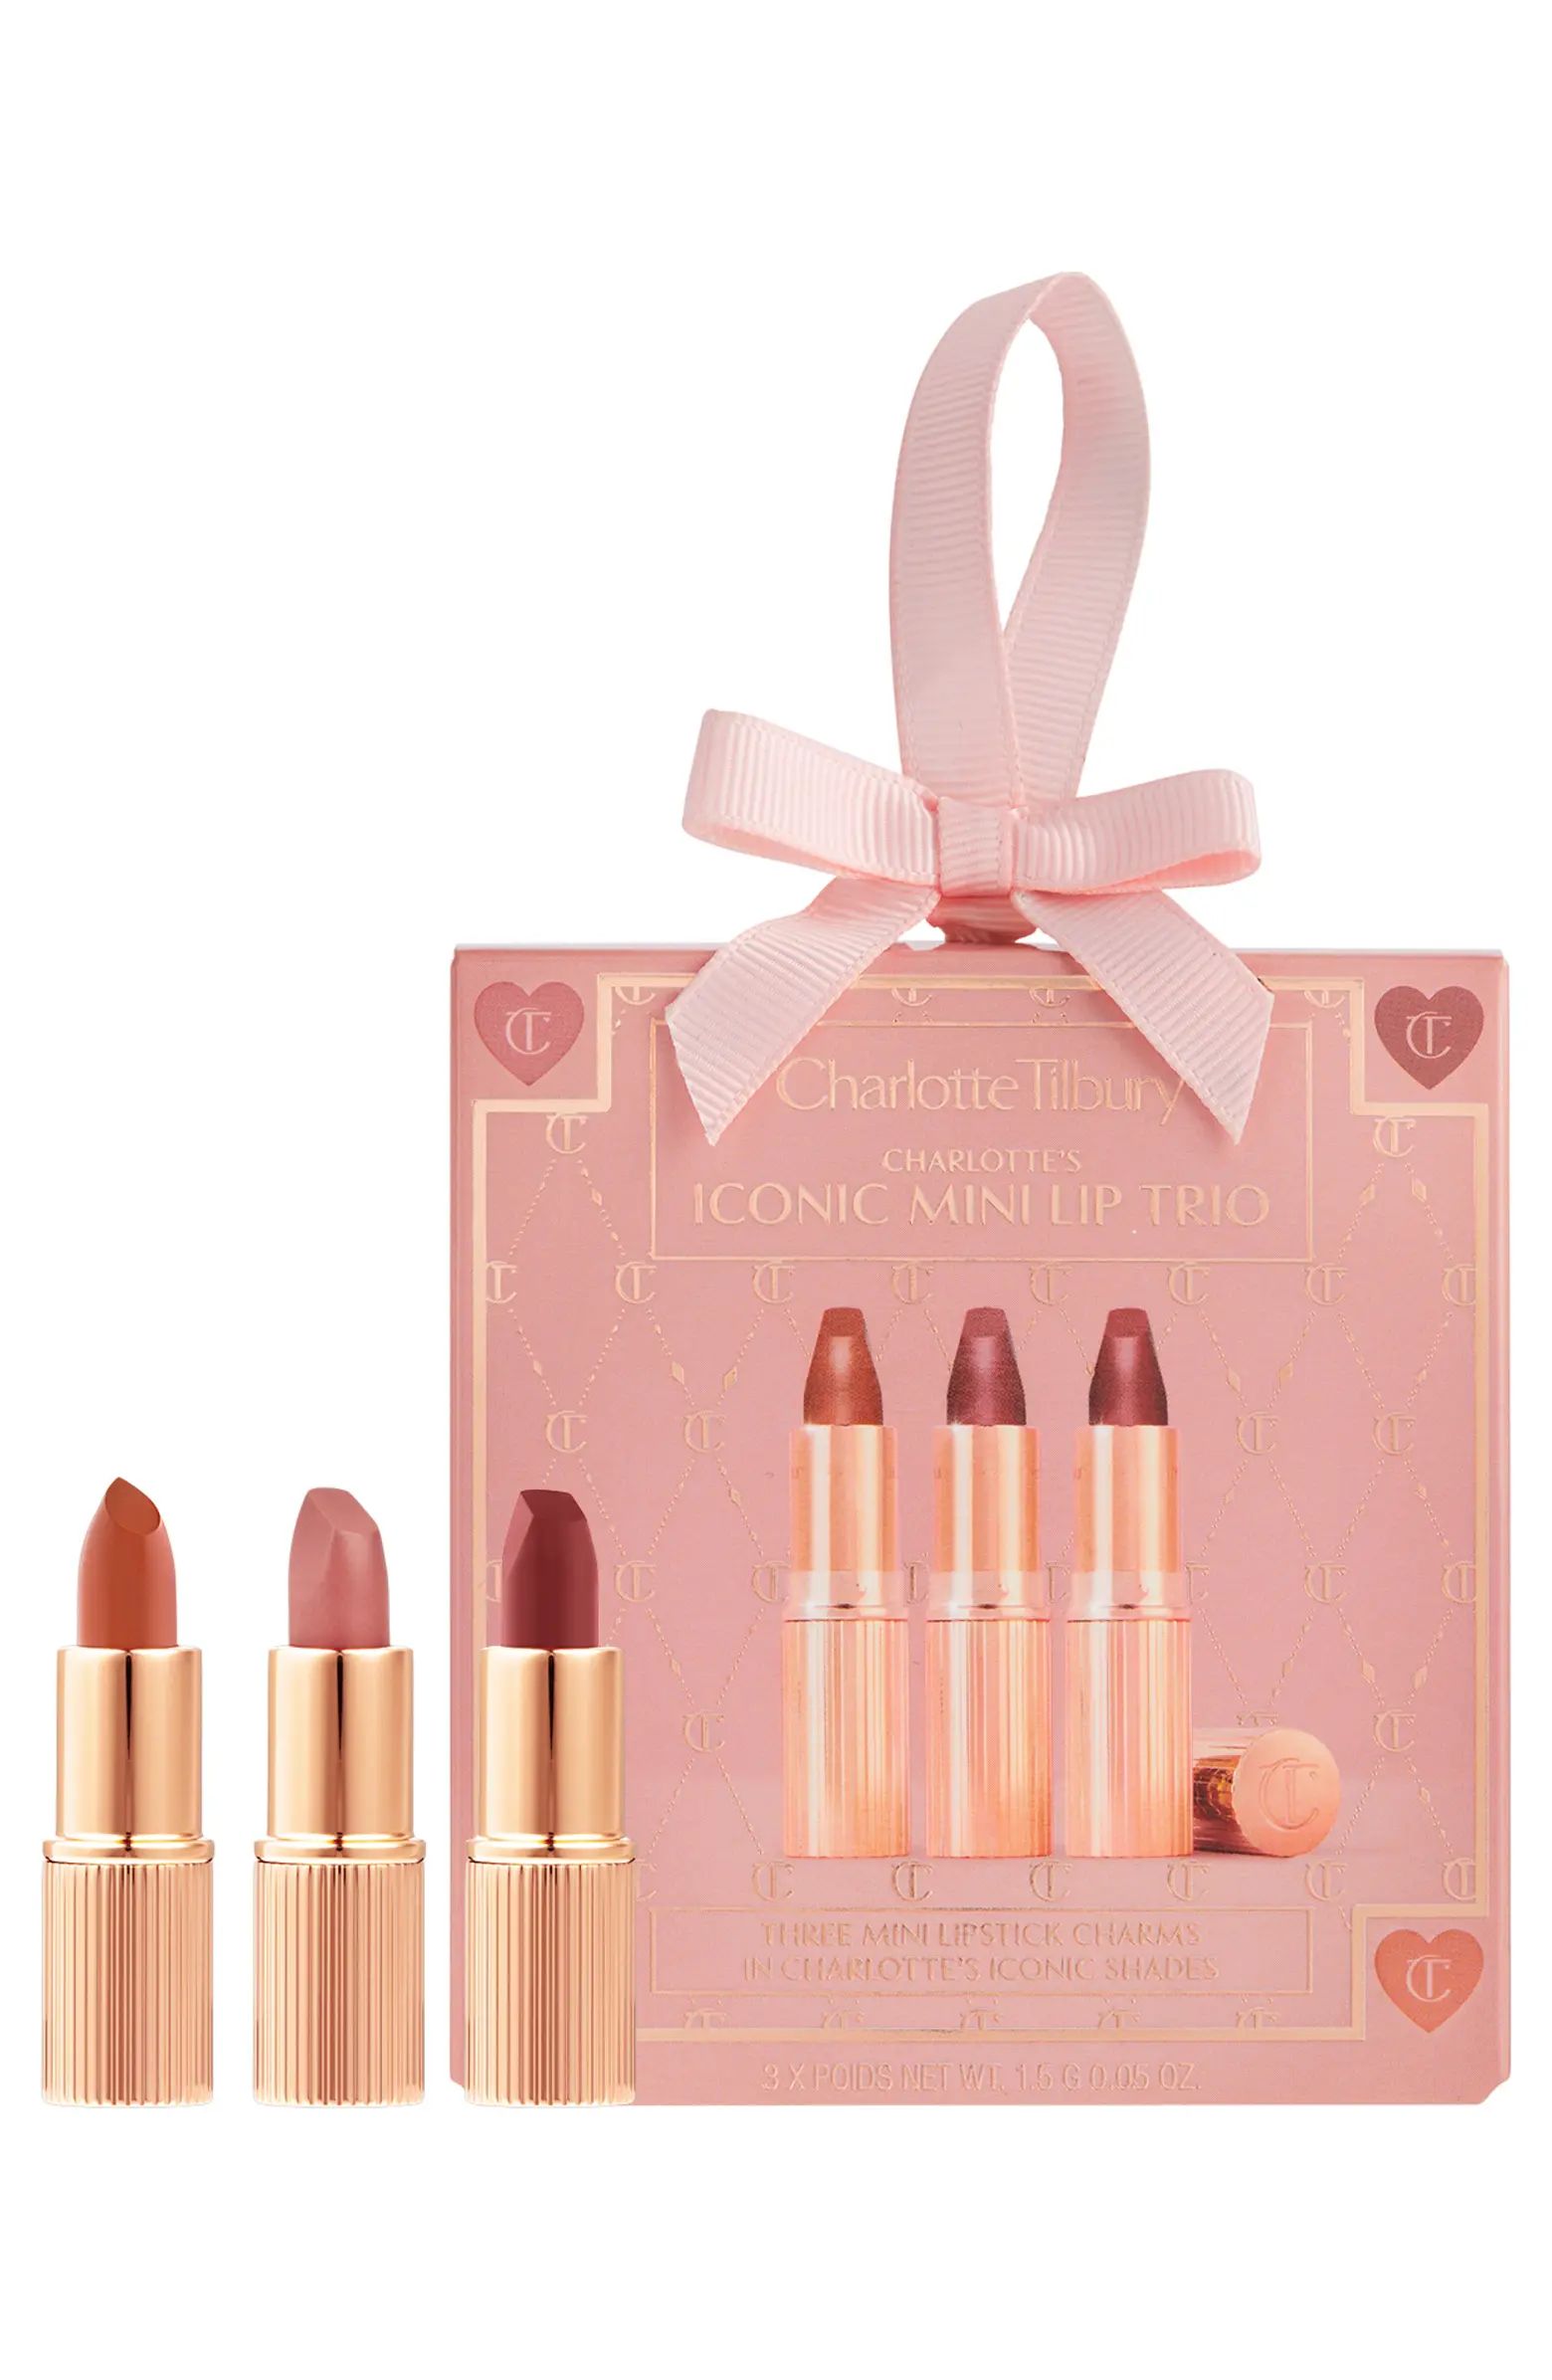 Charlotte Tilbury Iconic Lip Trio (Limited Edition) $45 Value | Nordstrom | Nordstrom